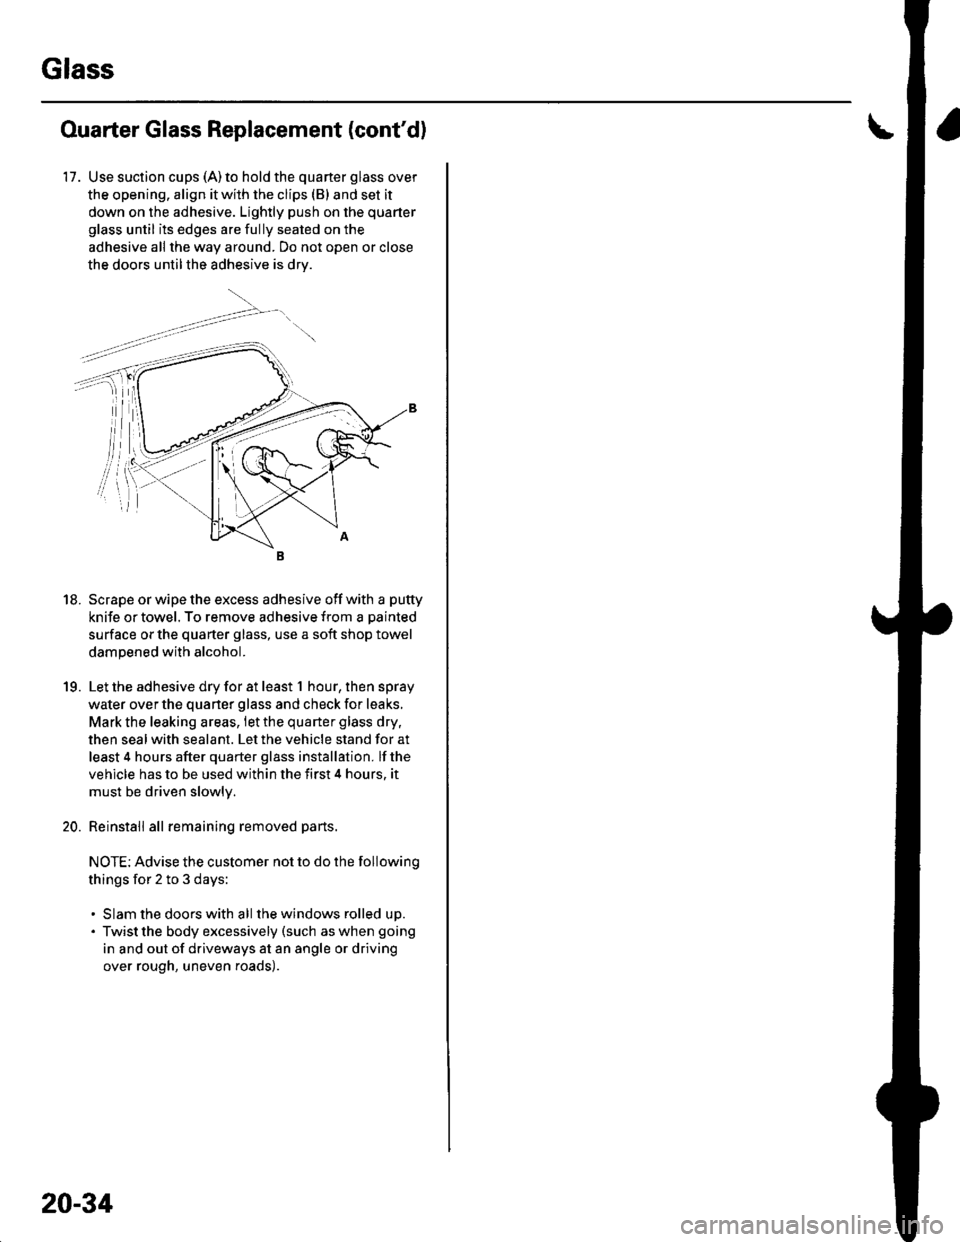 HONDA CIVIC 2003 7.G Owners Manual Glass
Ouarter Glass Replacement (contd)
17. Use suction cups (A)to hold the quarter glass over
the opening. align it with the clips (B) and set it
down on the adhesive. Lightly push on the quarter
gl